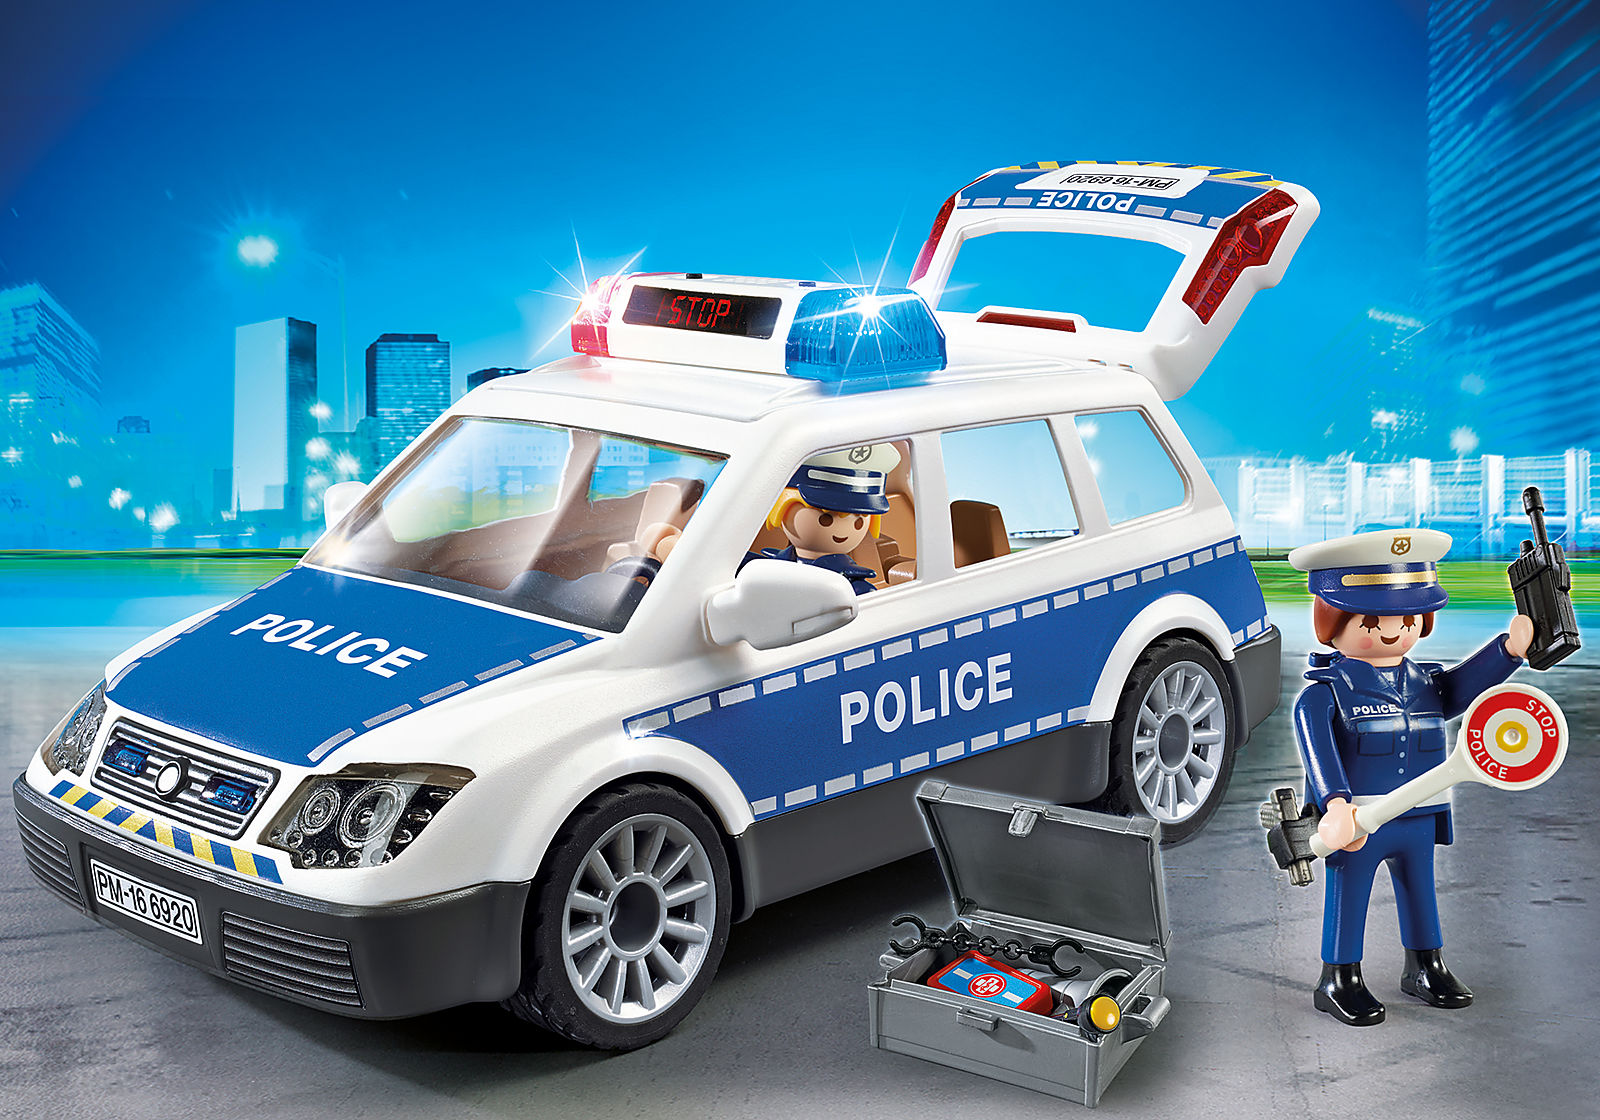 Squad Car with Lights & Sound (#6920)